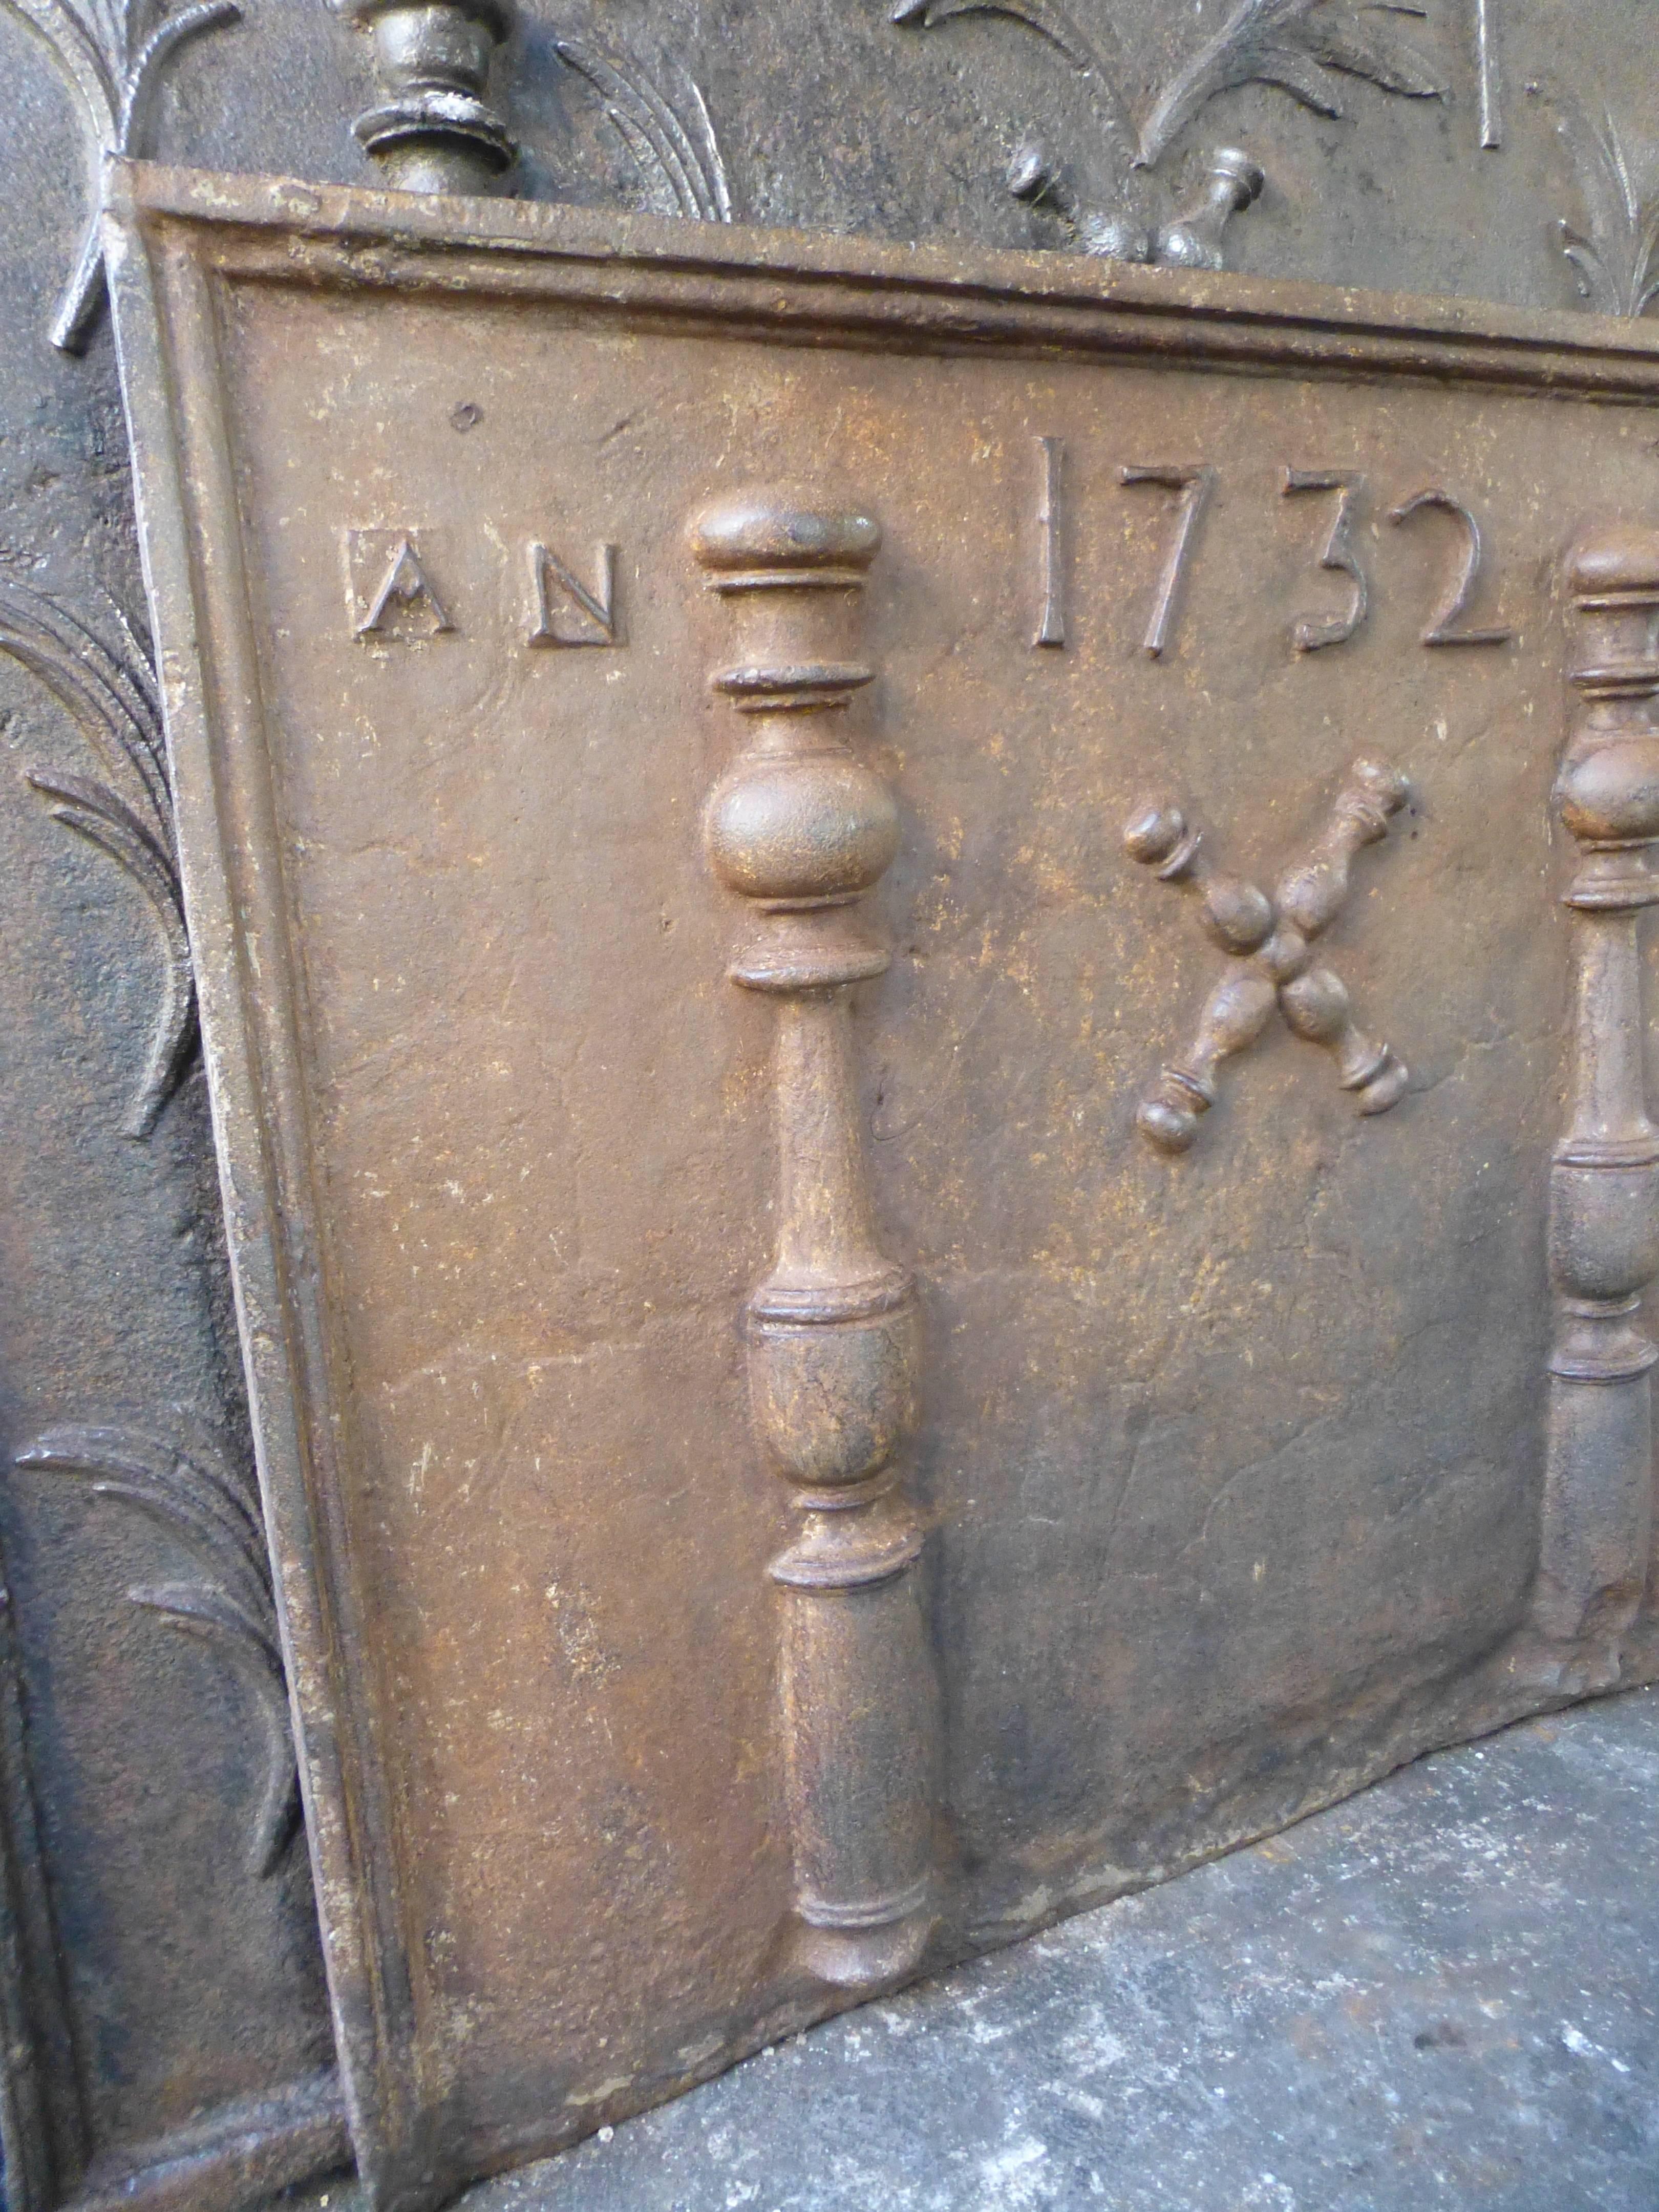 French fireback with pillars, the cross of Saint Andrew and the date of production 1732.

Saint Andrew is said to have been martyred on a cross in this shape. It appears in numerous flags such as Saint Patrick's flag, the Spanish flag and the Arms